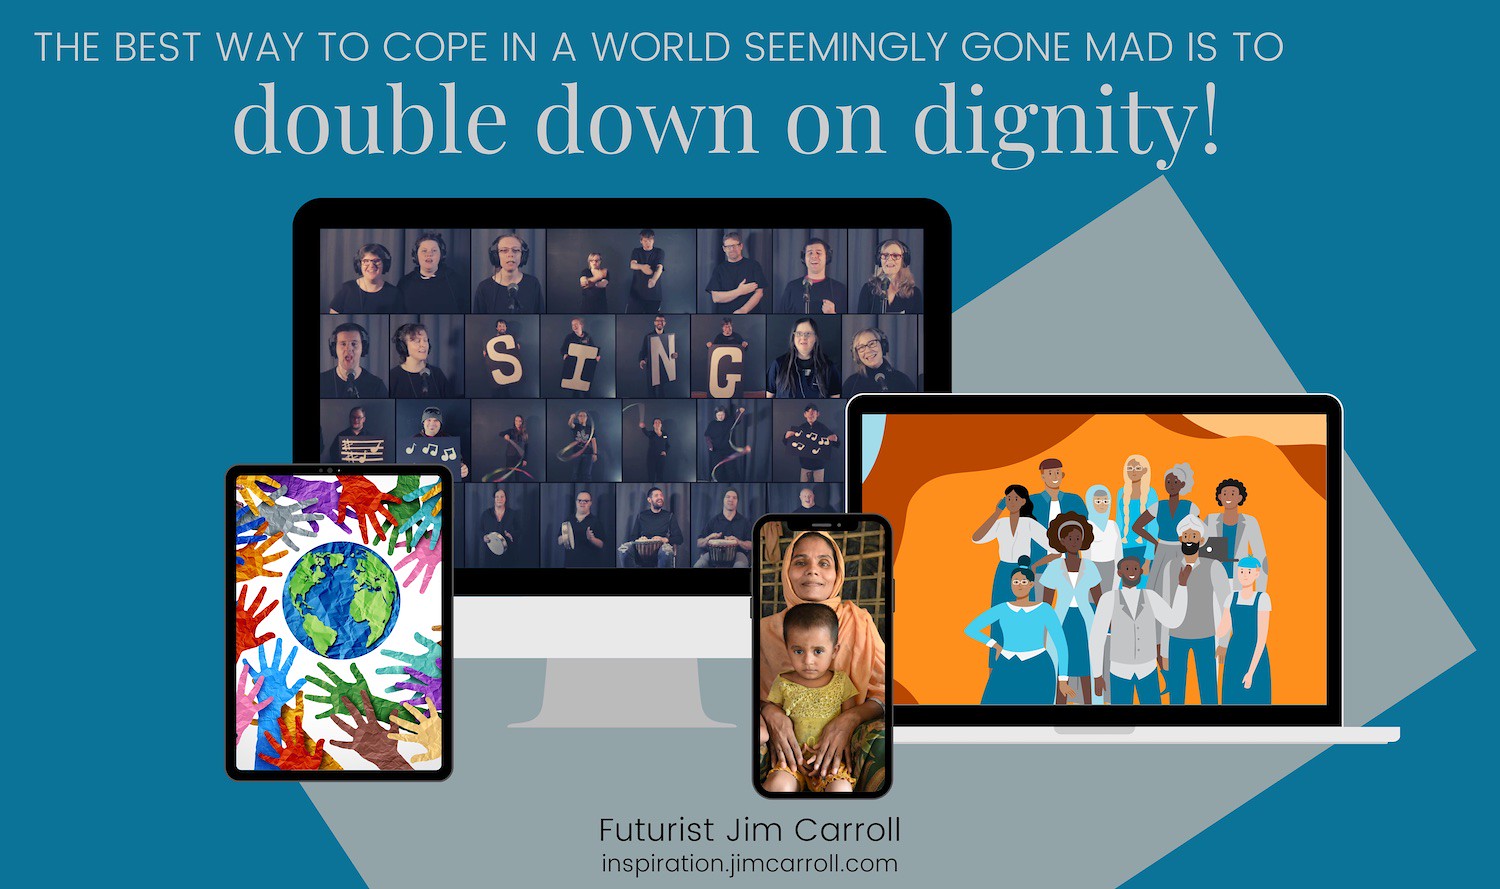 Doubl"The best way to cope in a world seemingly gone mad is to double down on dignity!" - Futurist Jim Carroll